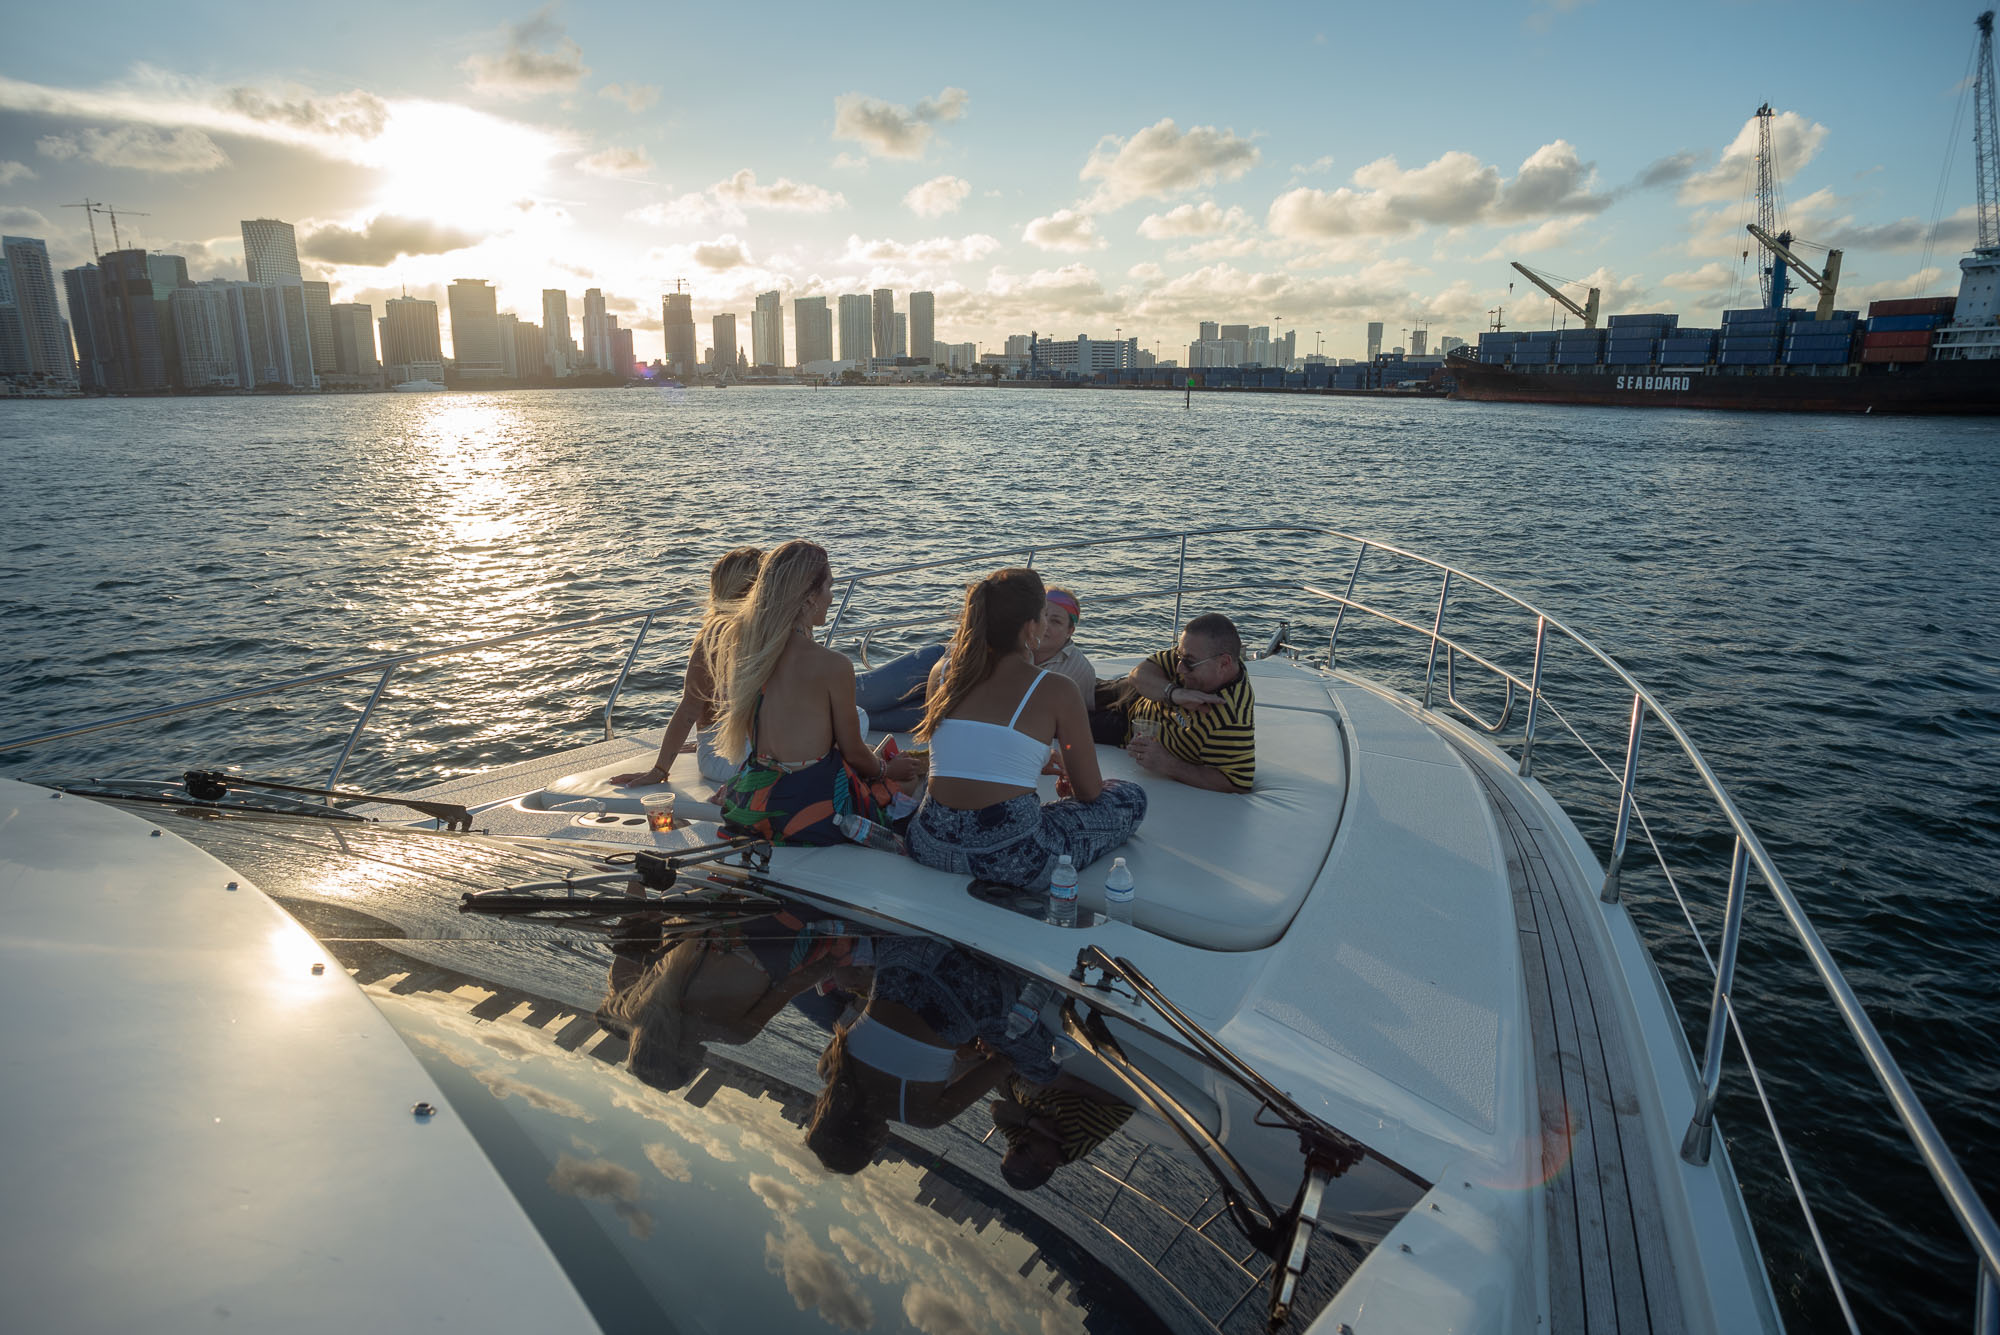 Group enjoying a sunset during a boat rental excursion